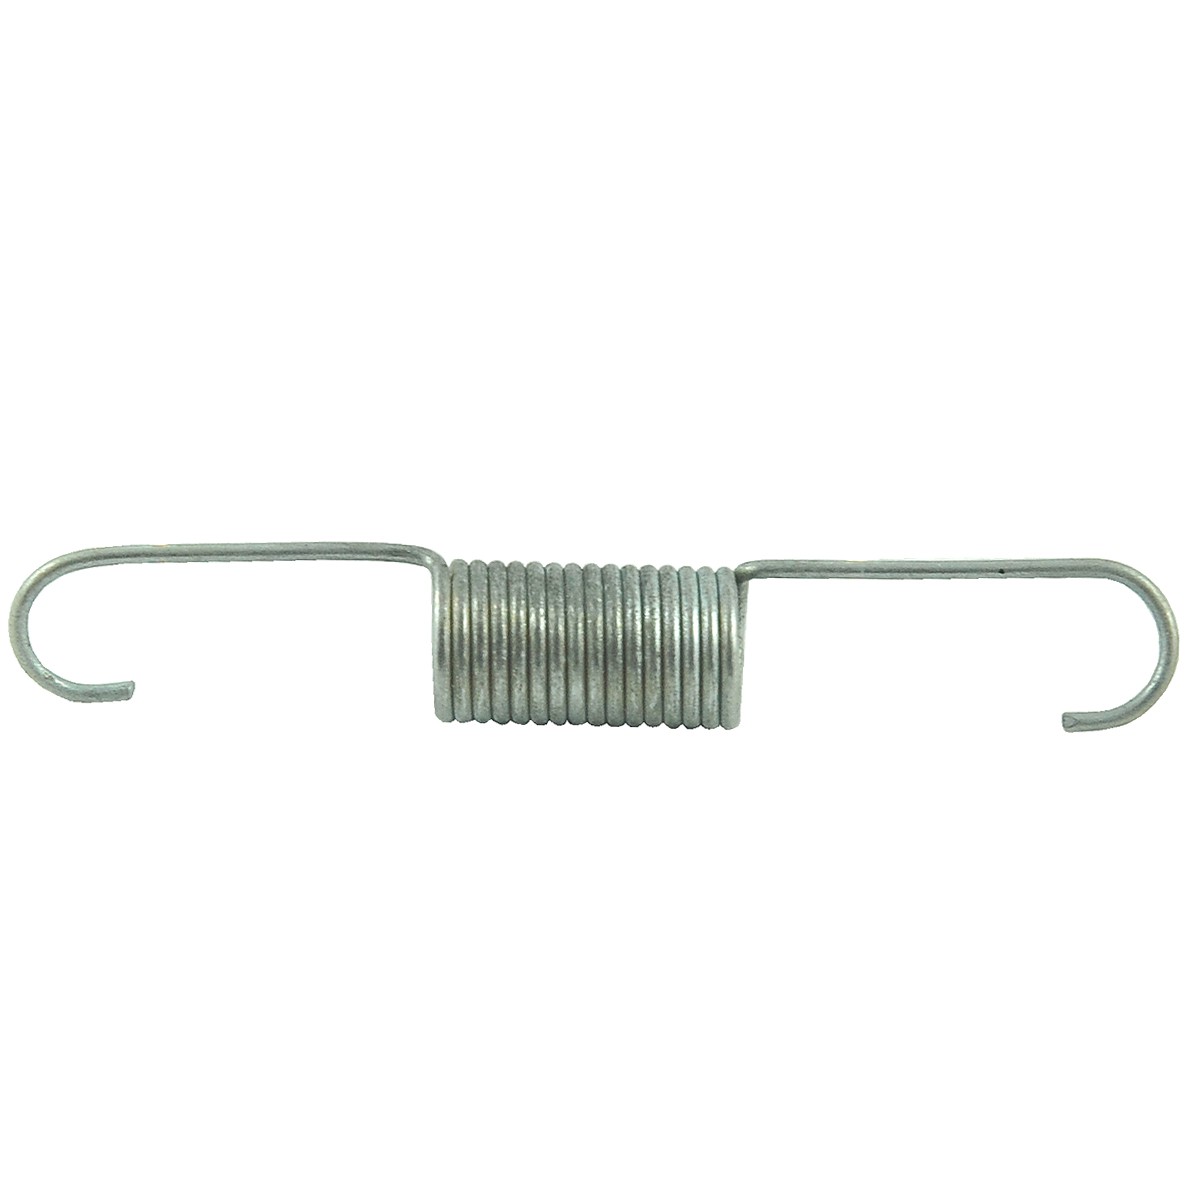 Gas pedal spring / Startrac 263 / 11203255